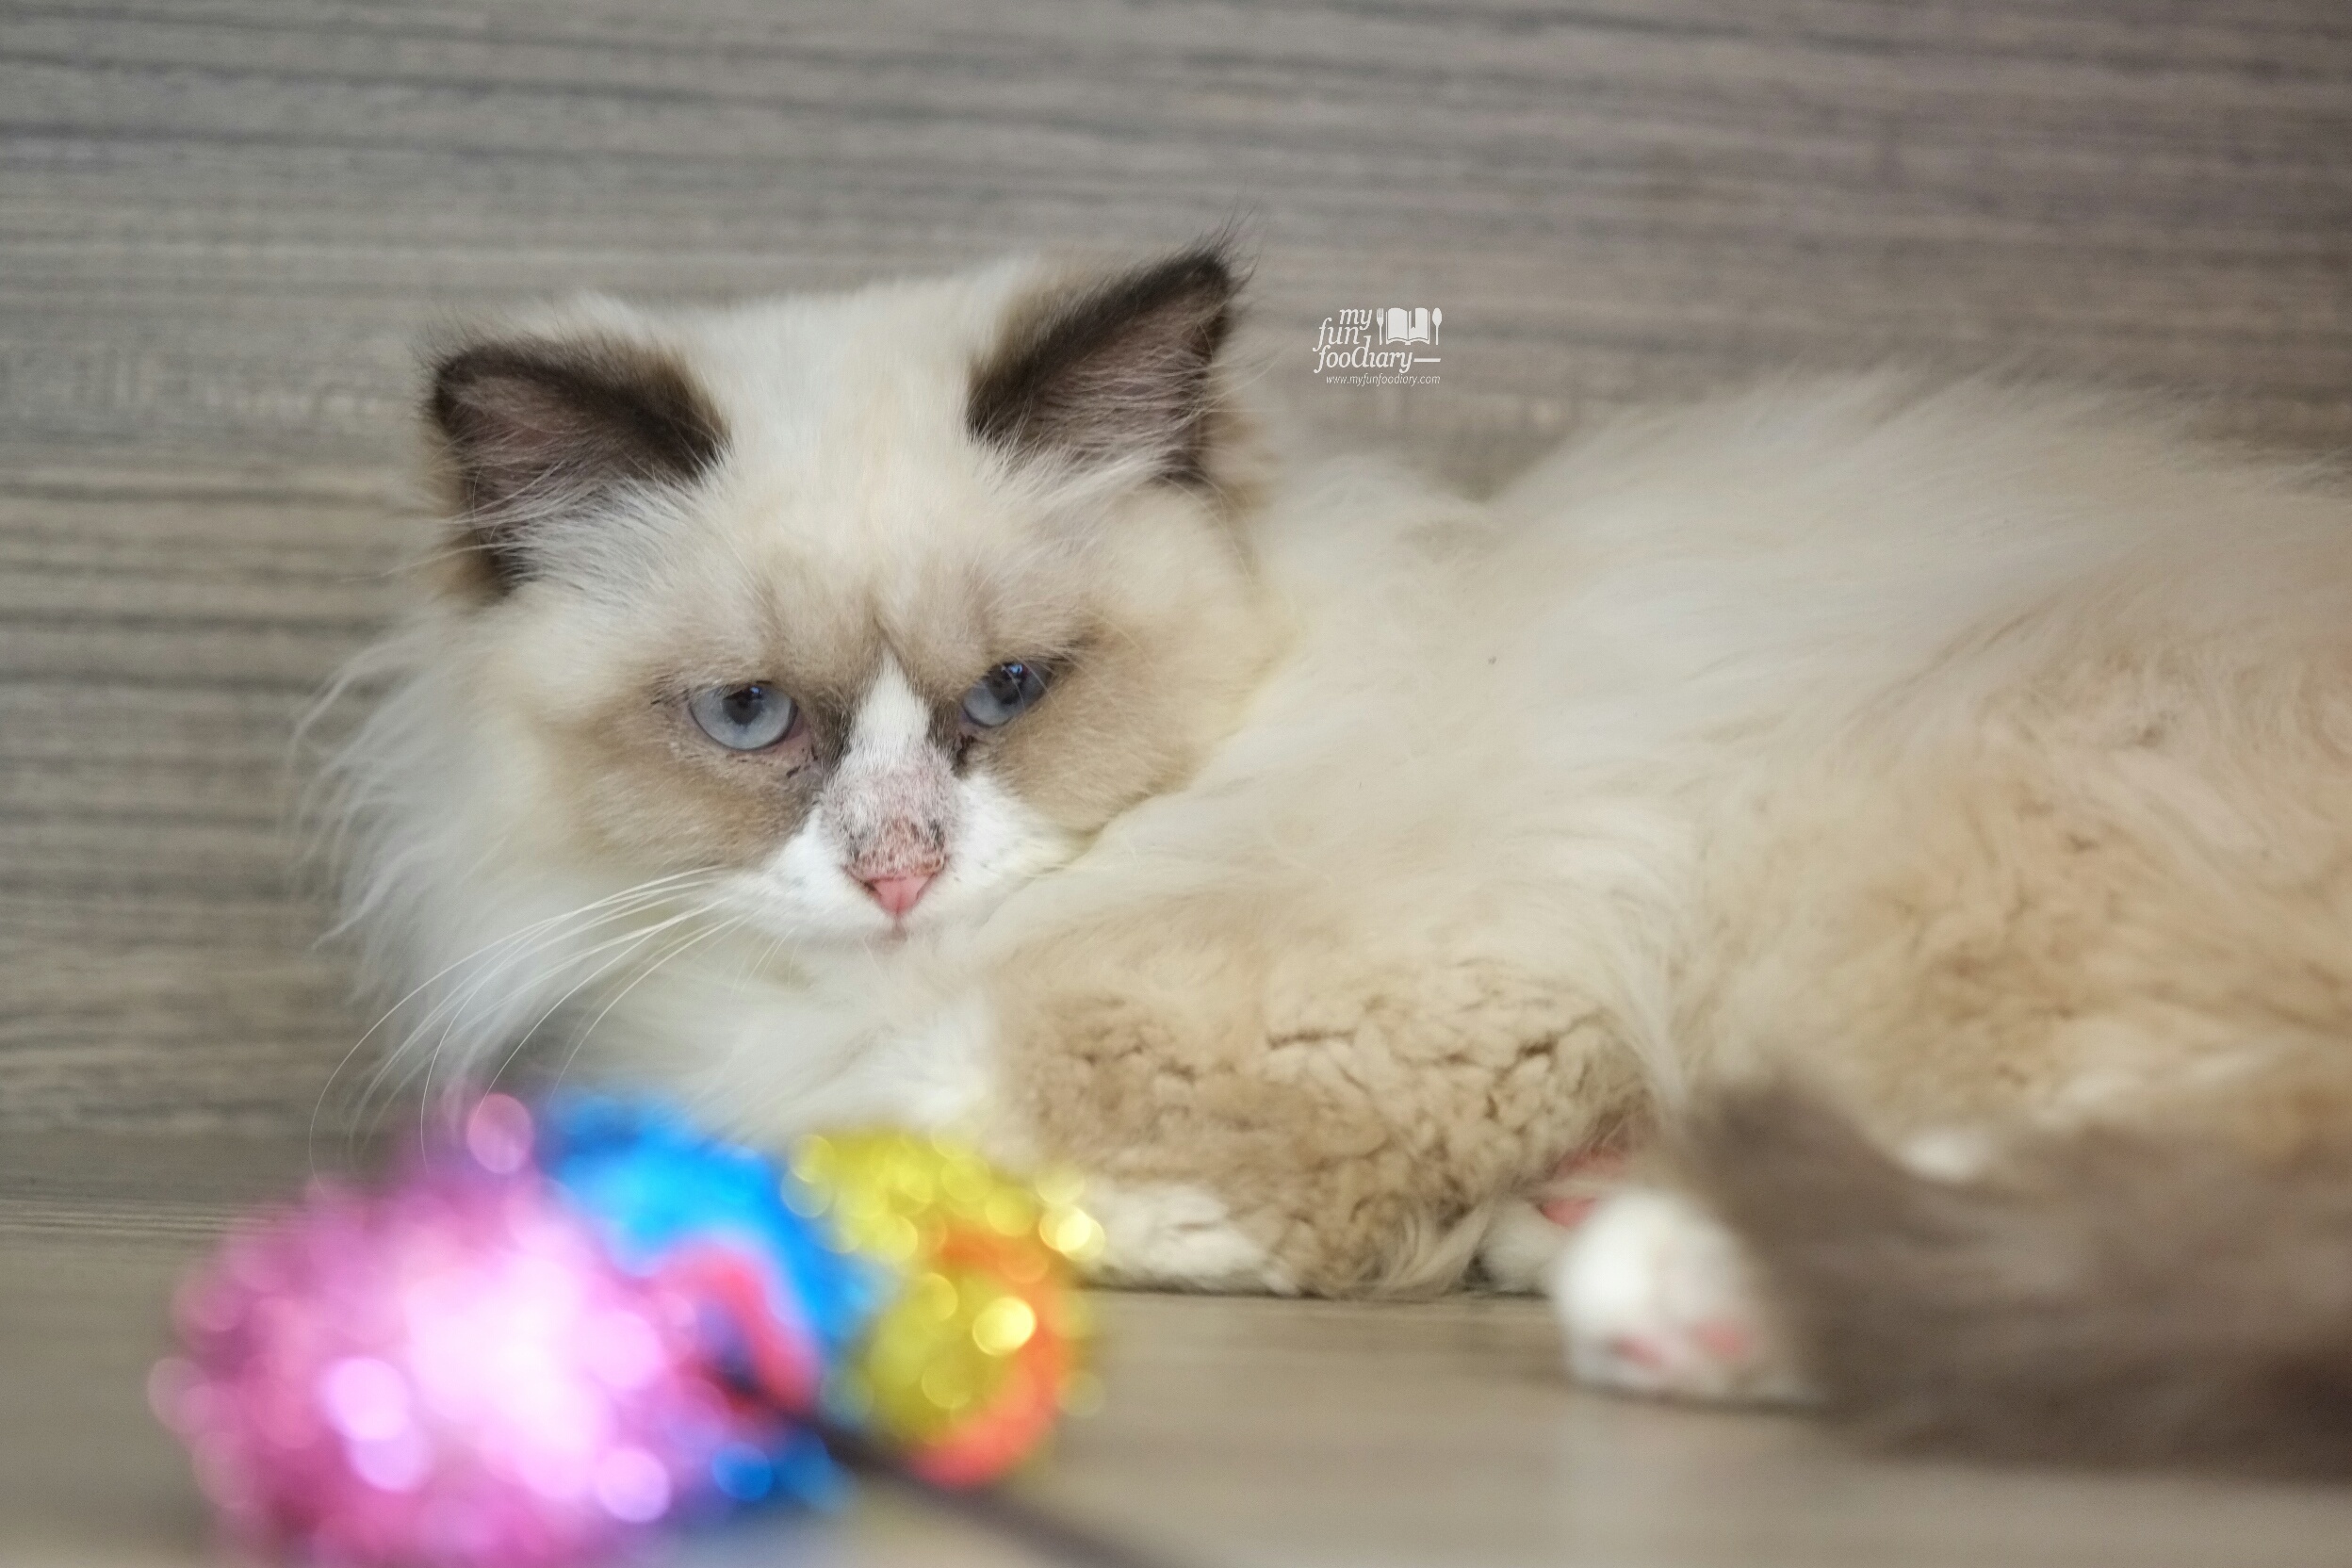 Muffin at Cutie Cats Cafe by Myfunfoodiary